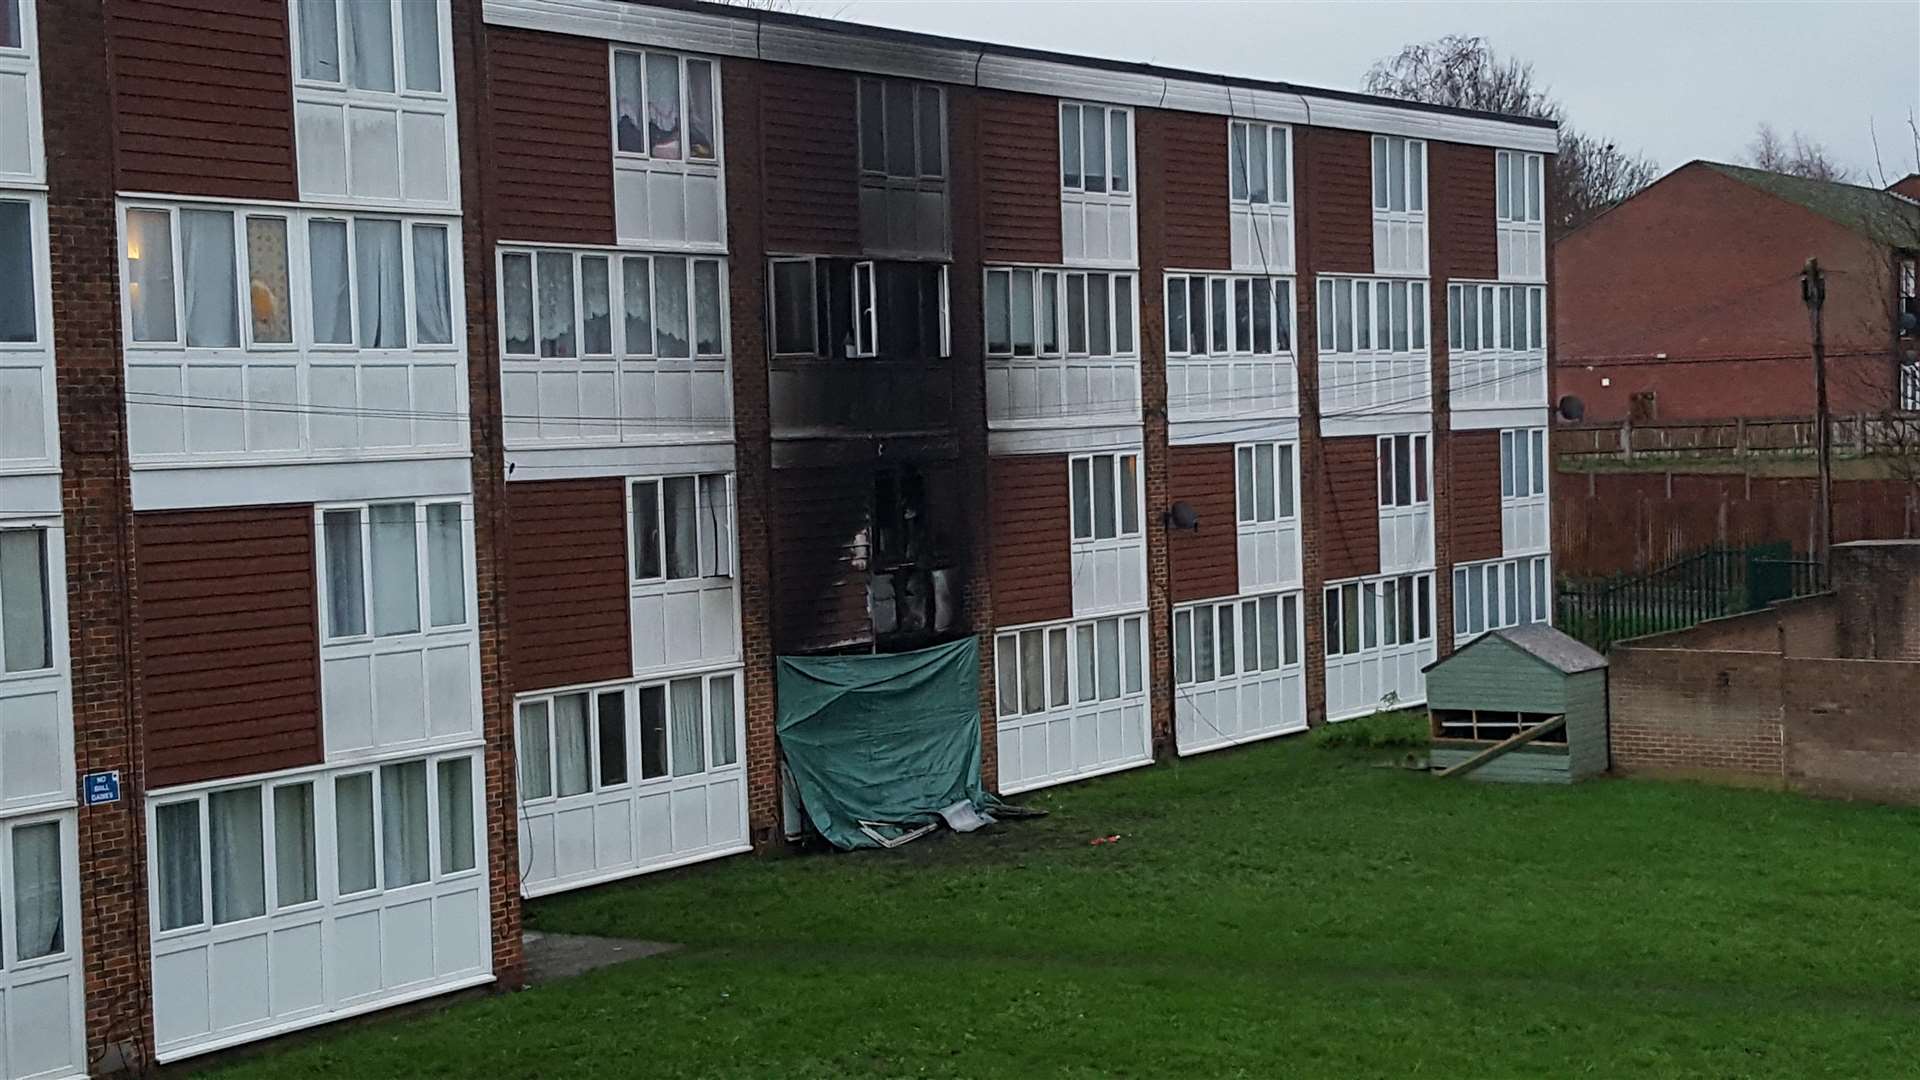 The fire in Walshaw House claimed the life of a woman in her 60s